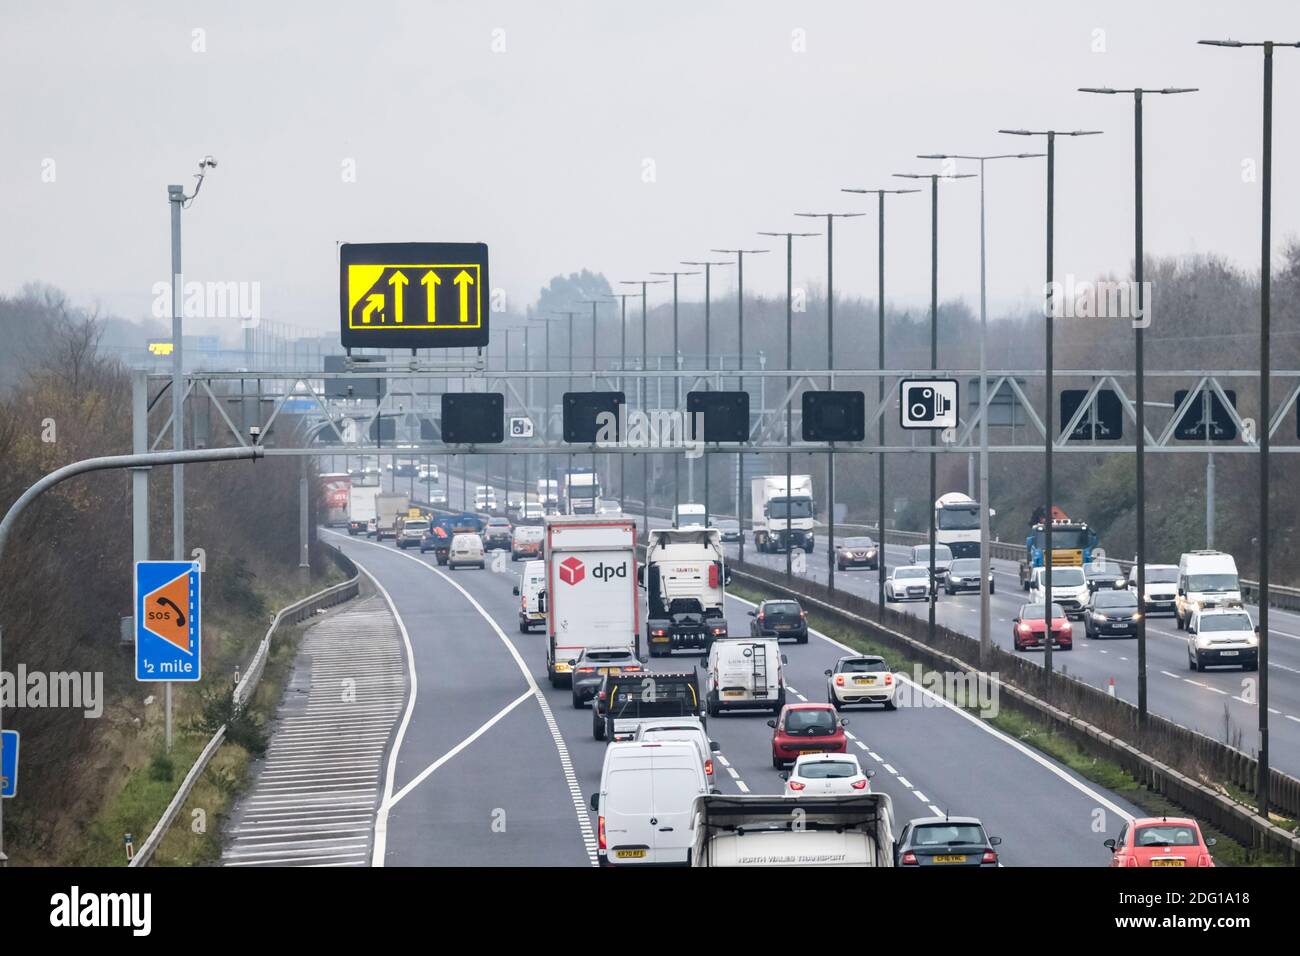 Bristol, UK. 7th Dec, 2020. Poor visibility all day and the Met Office have now issued a yellow warning for fog this evening. Monday afternoon traffic builds up on the M4 motorway heading towards east Bristol. Credit: JMF News/Alamy Live News Stock Photo